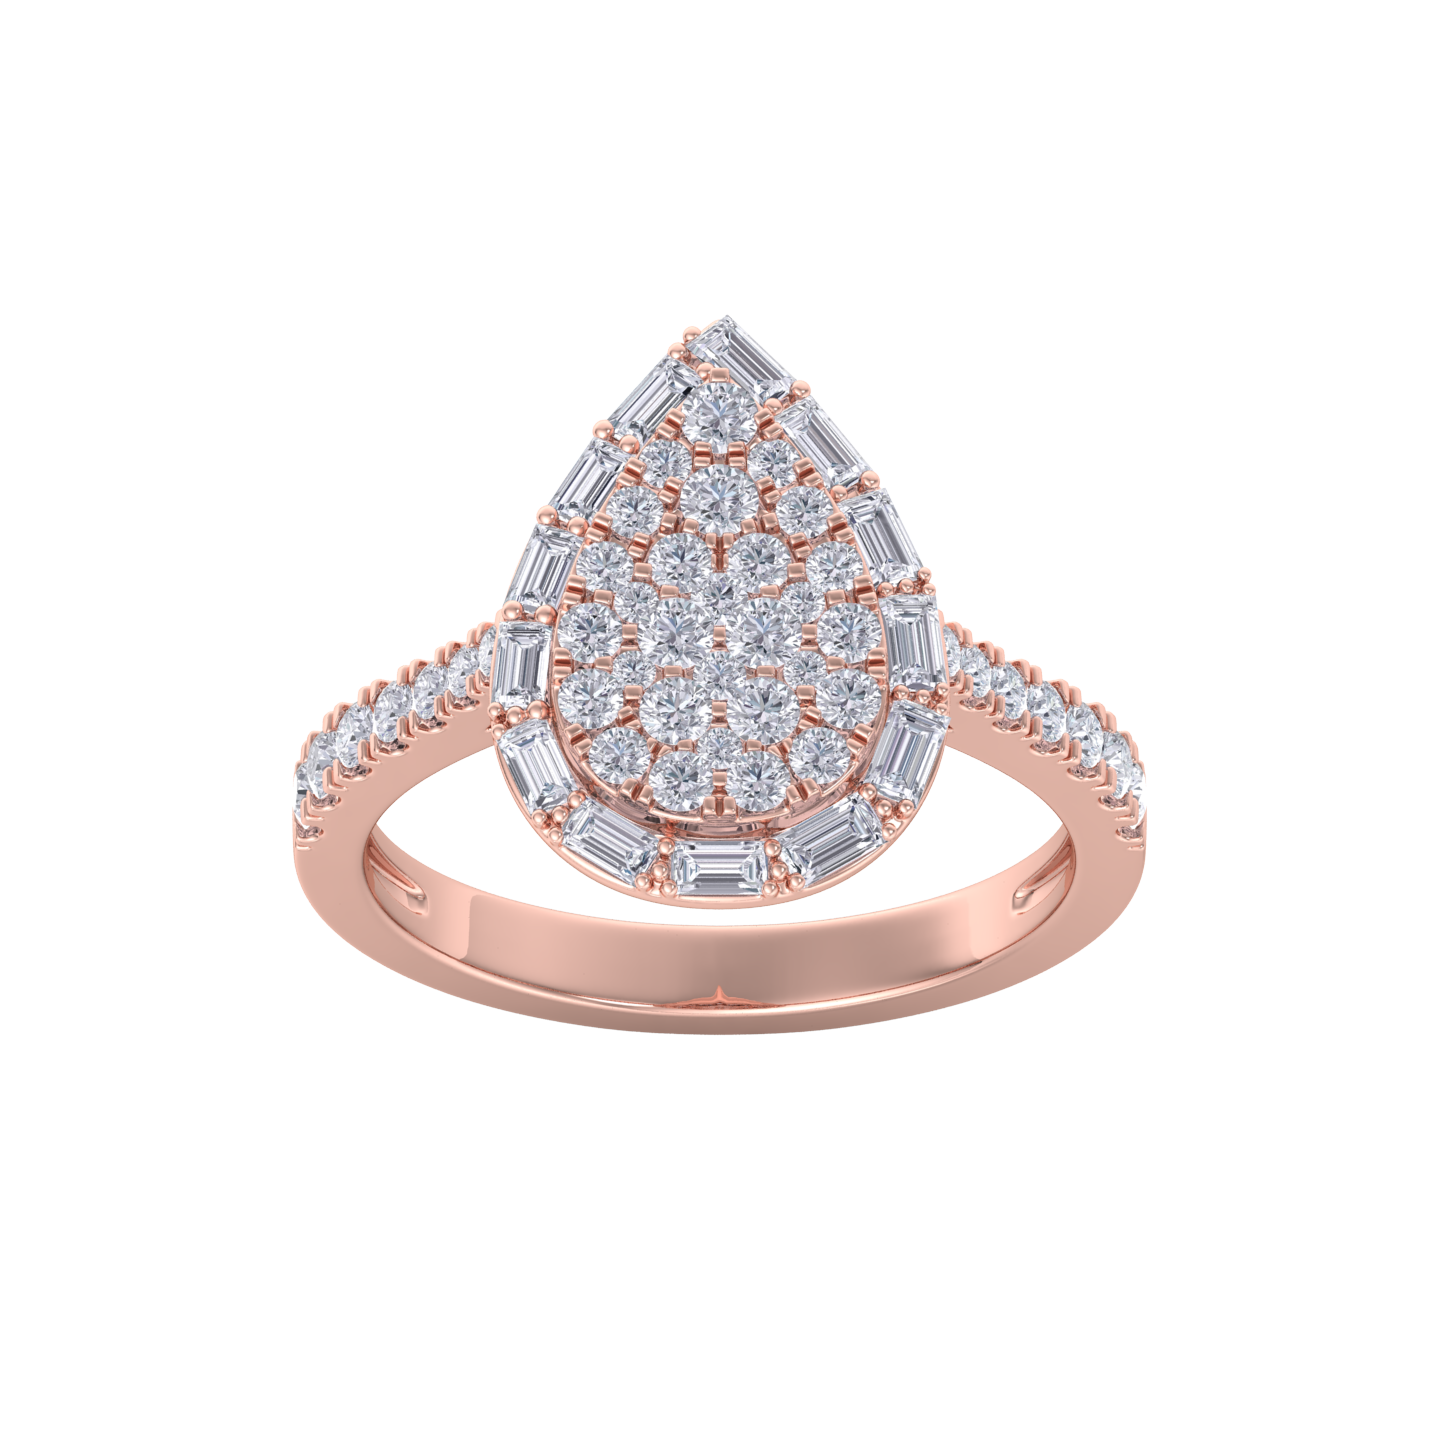 Pear cluster ring in rose gold with white diamonds of 1.01 ct in weight